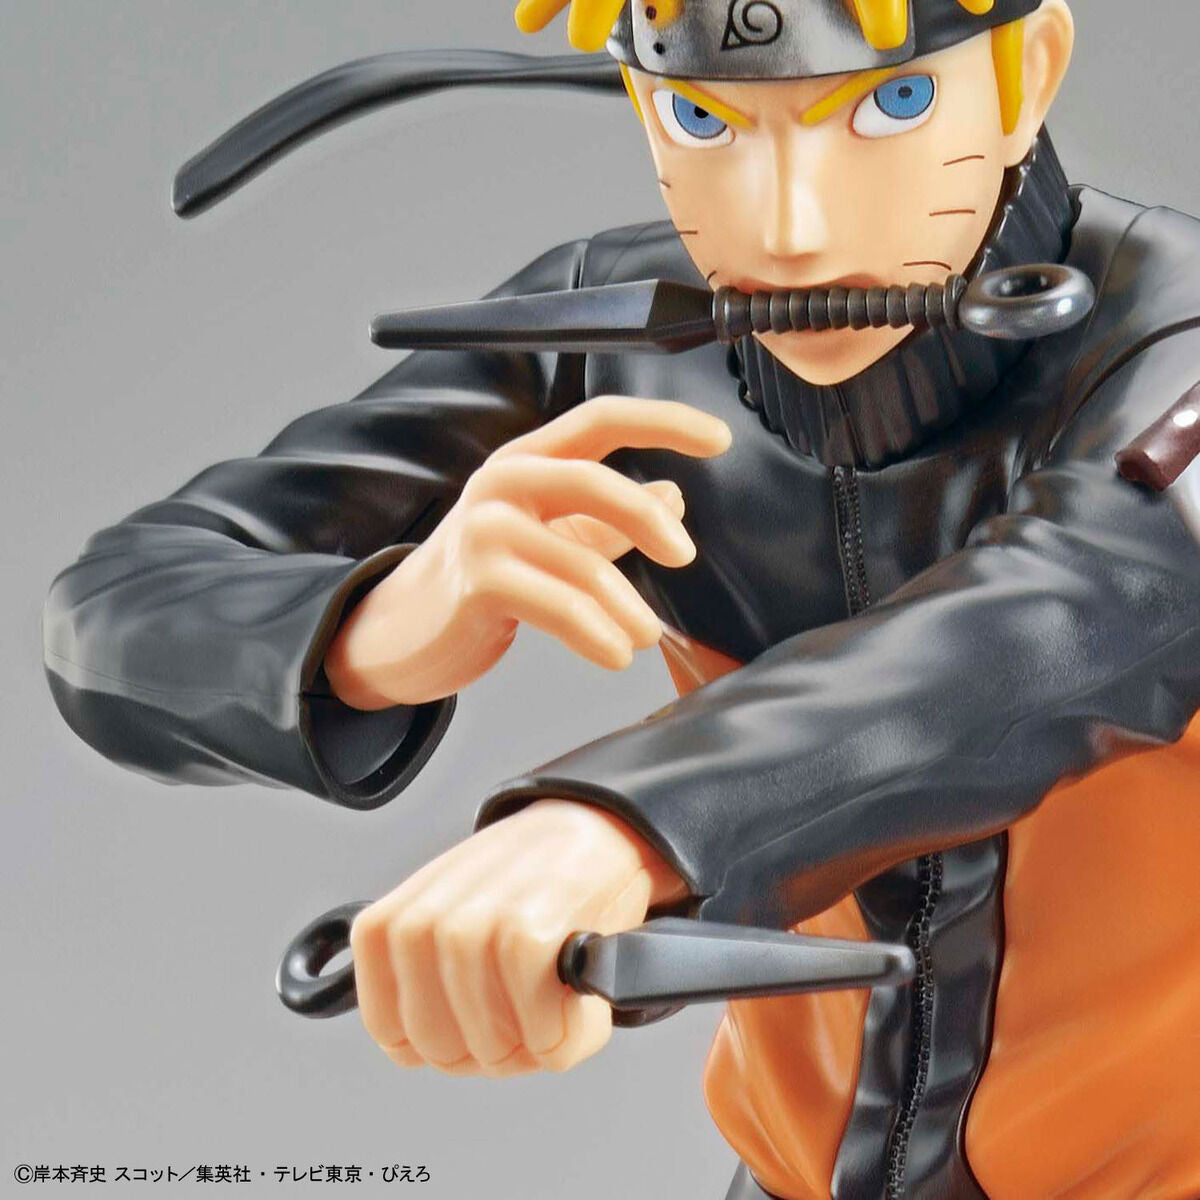 Naruto Shippuden - Uzumaki Naruto - ENTRY GRADE Model Kit, Beginner-friendly model kit with color-separated parts and dynamic sculpting, Nippon Figures